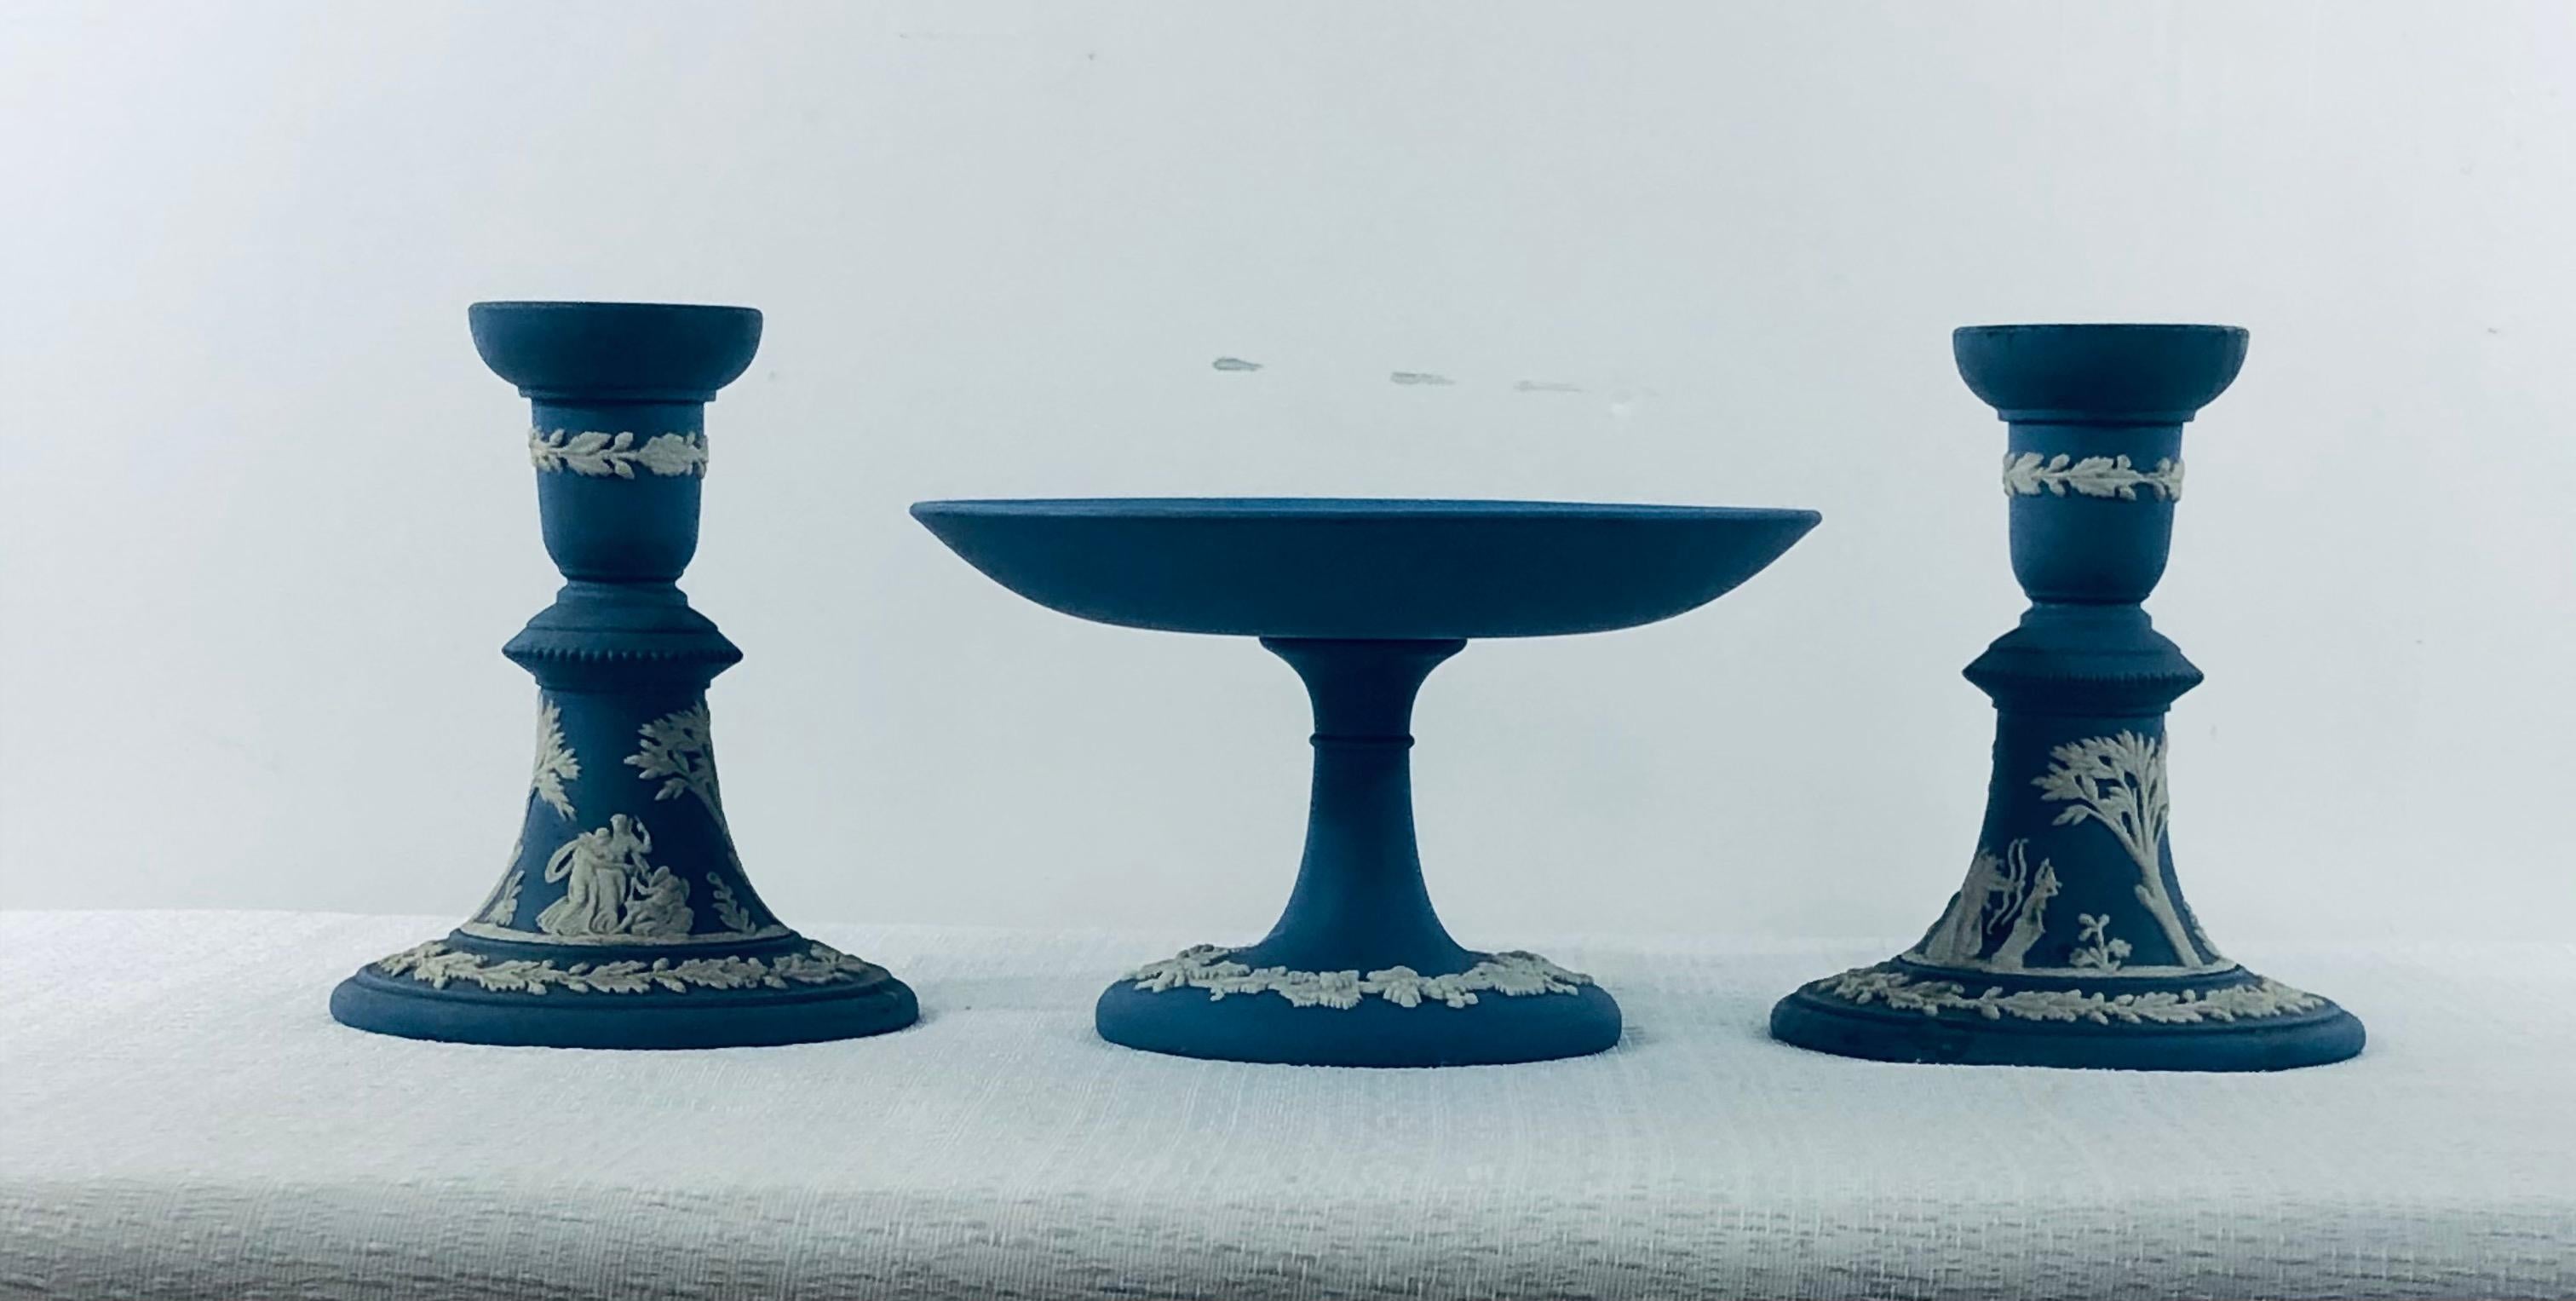 A pair of English Wedgwood Jasperware candleholders in “Wedgwood Blue” and decorative serving plate. Perfect to decorate your dining table in style. Each piece features a white design depicting high relief acanthus leaves and white sprigged